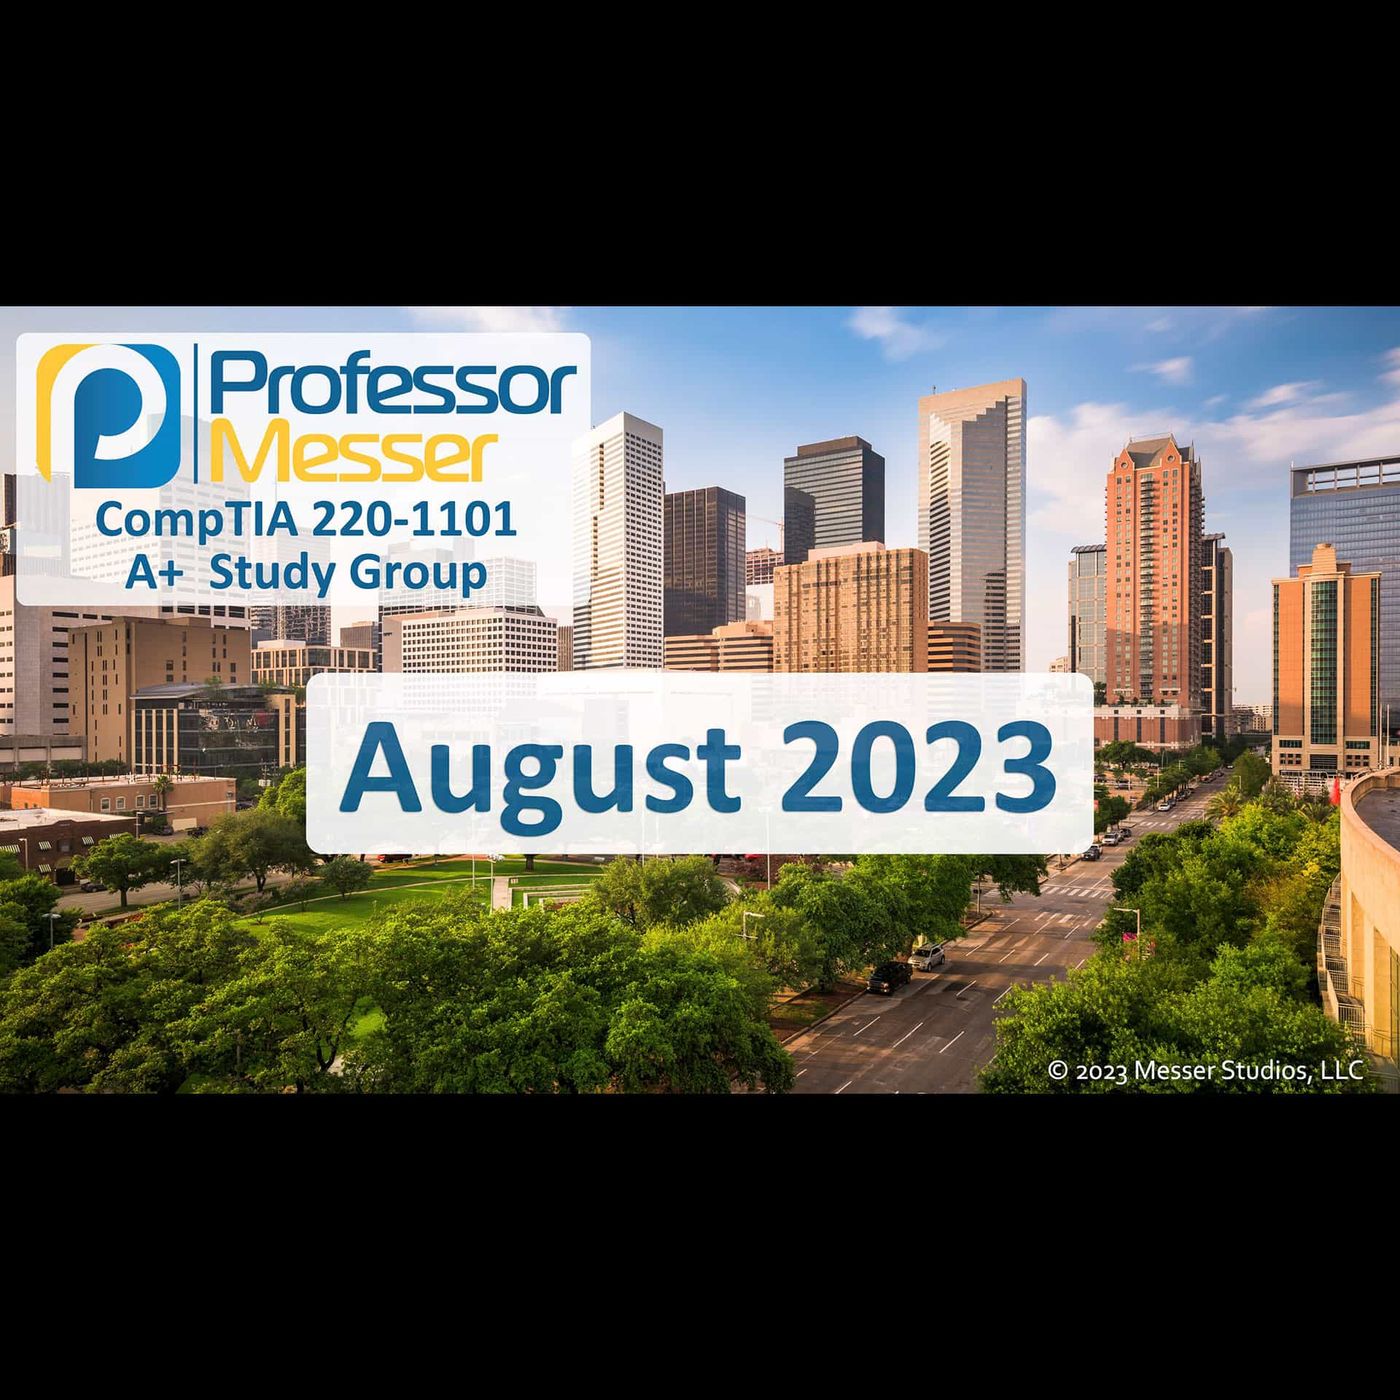 Professor Messer's CompTIA 220-1101 A+ Study Group - August 2023